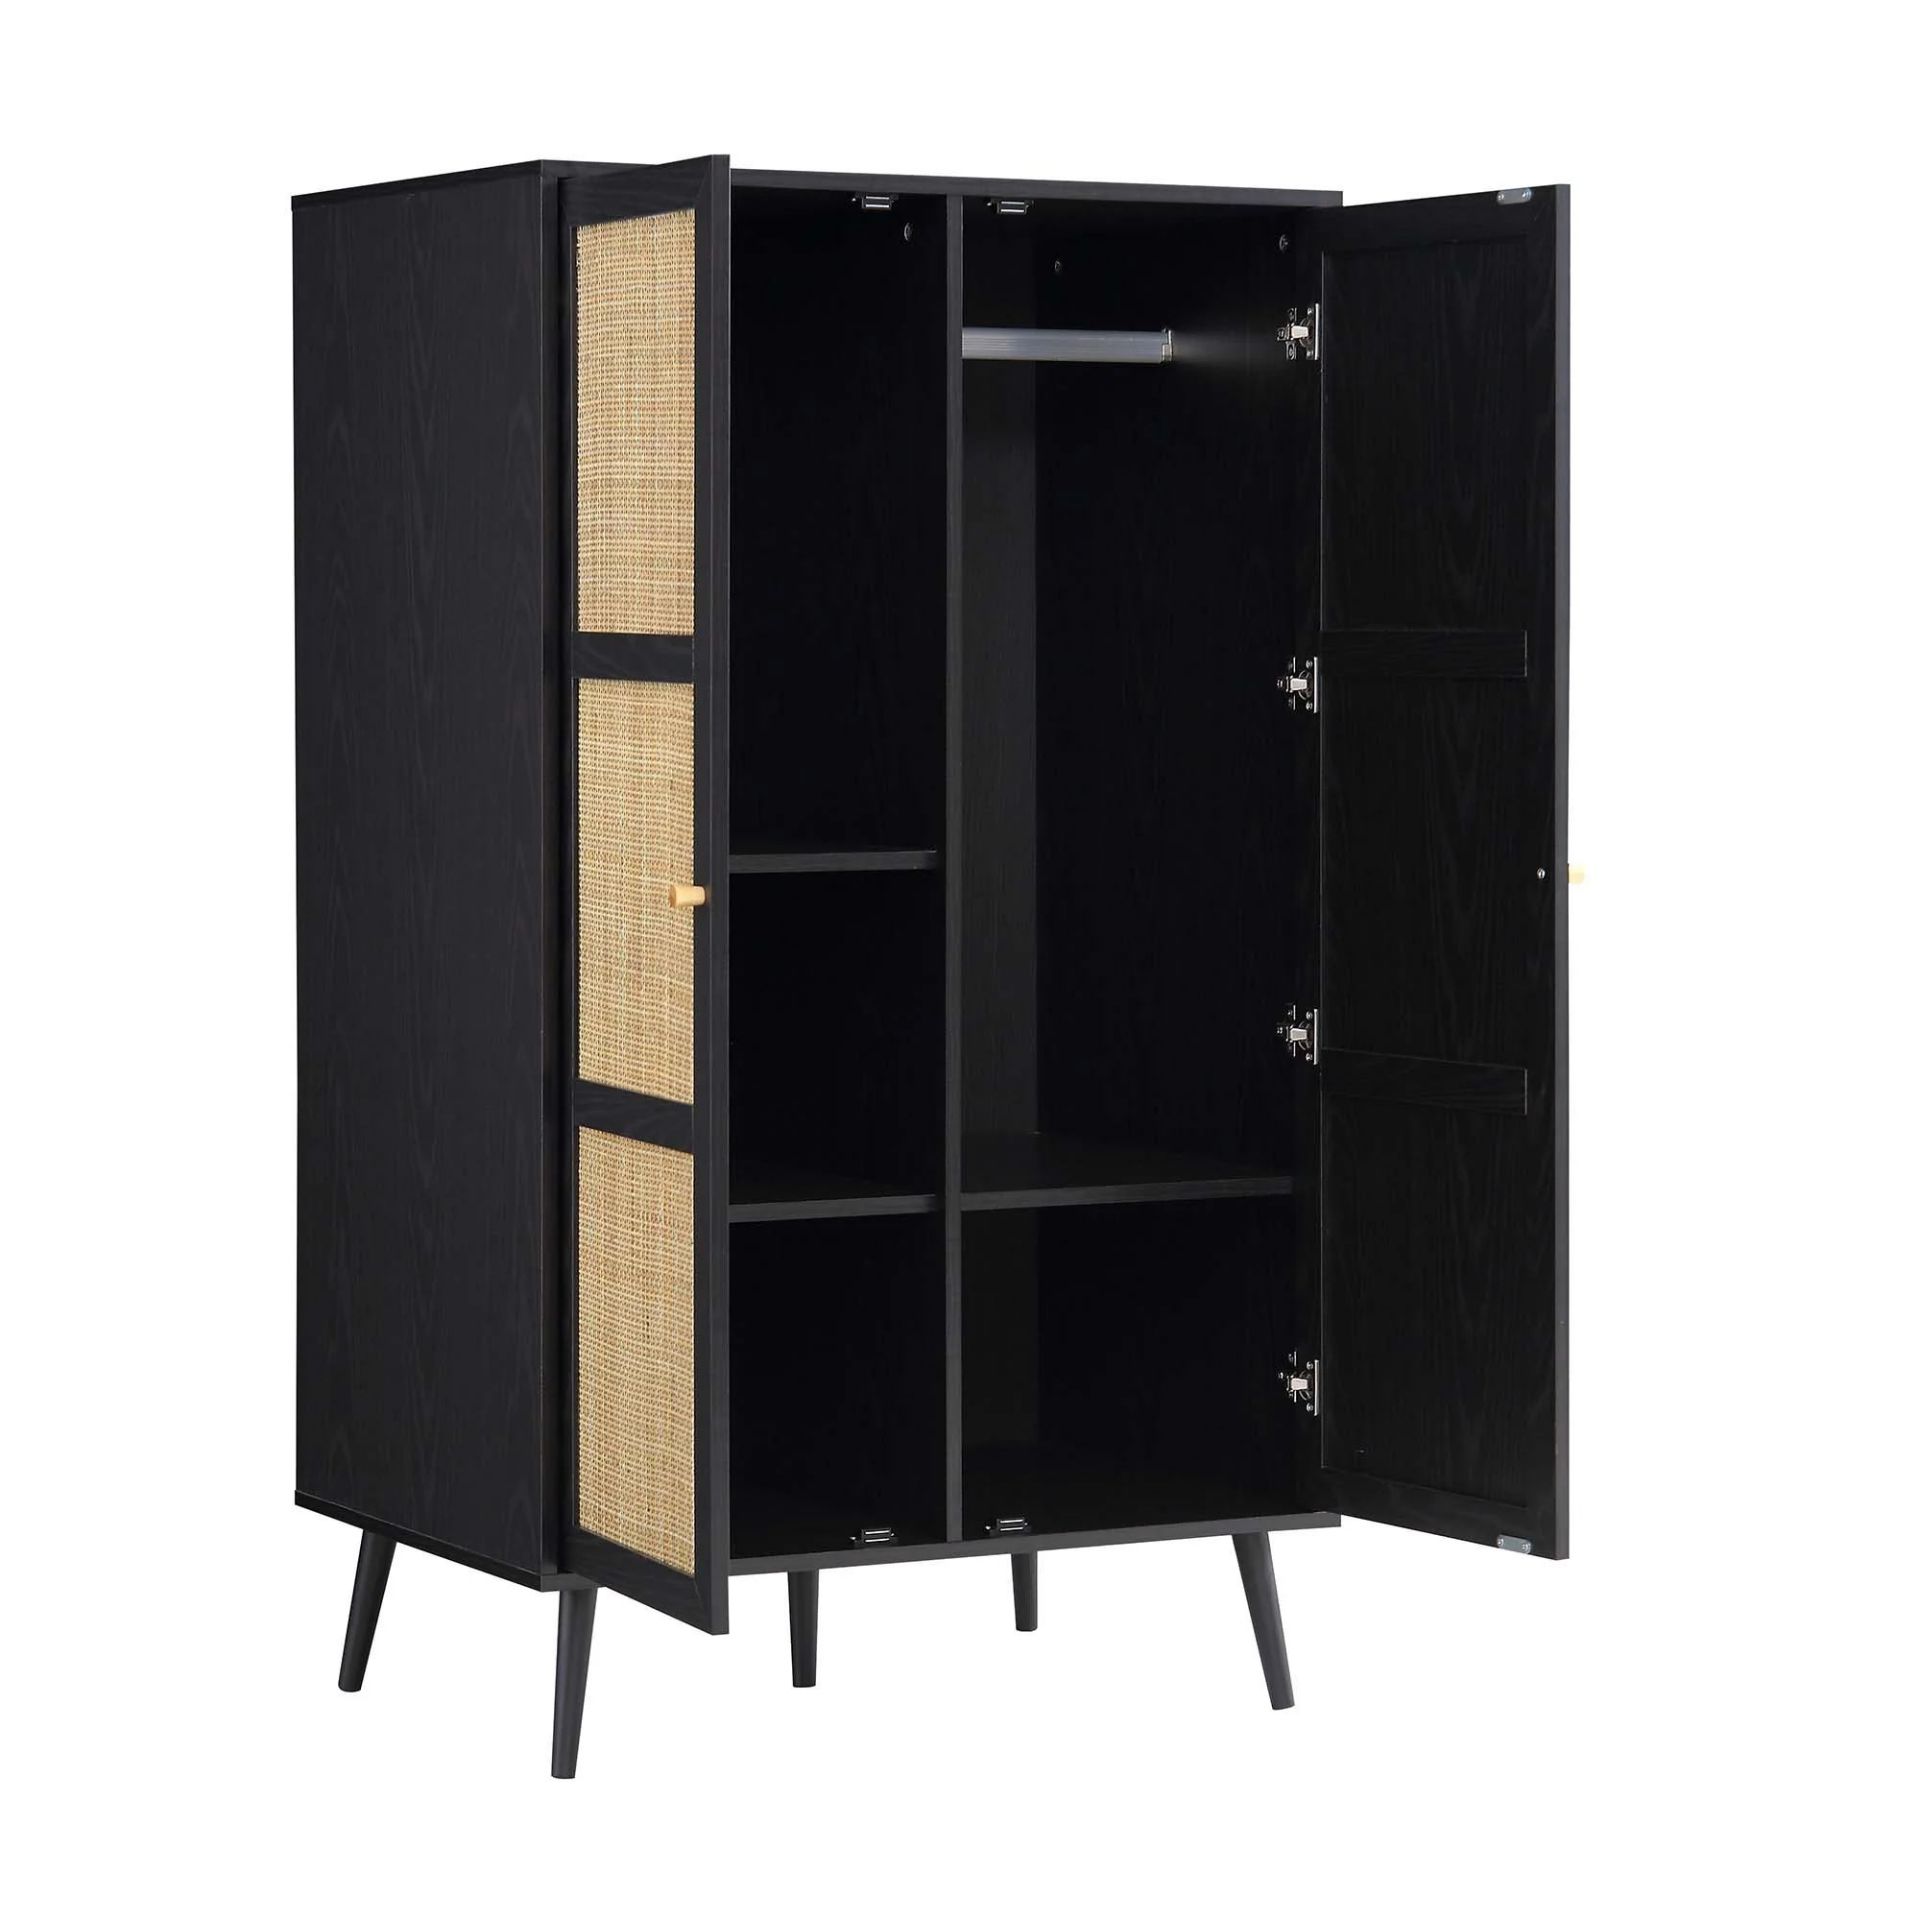 Frances Woven Rattan Compact Double Wardrobe, Black. -R14. RRP £379.99. Crafted from wood and - Image 2 of 2